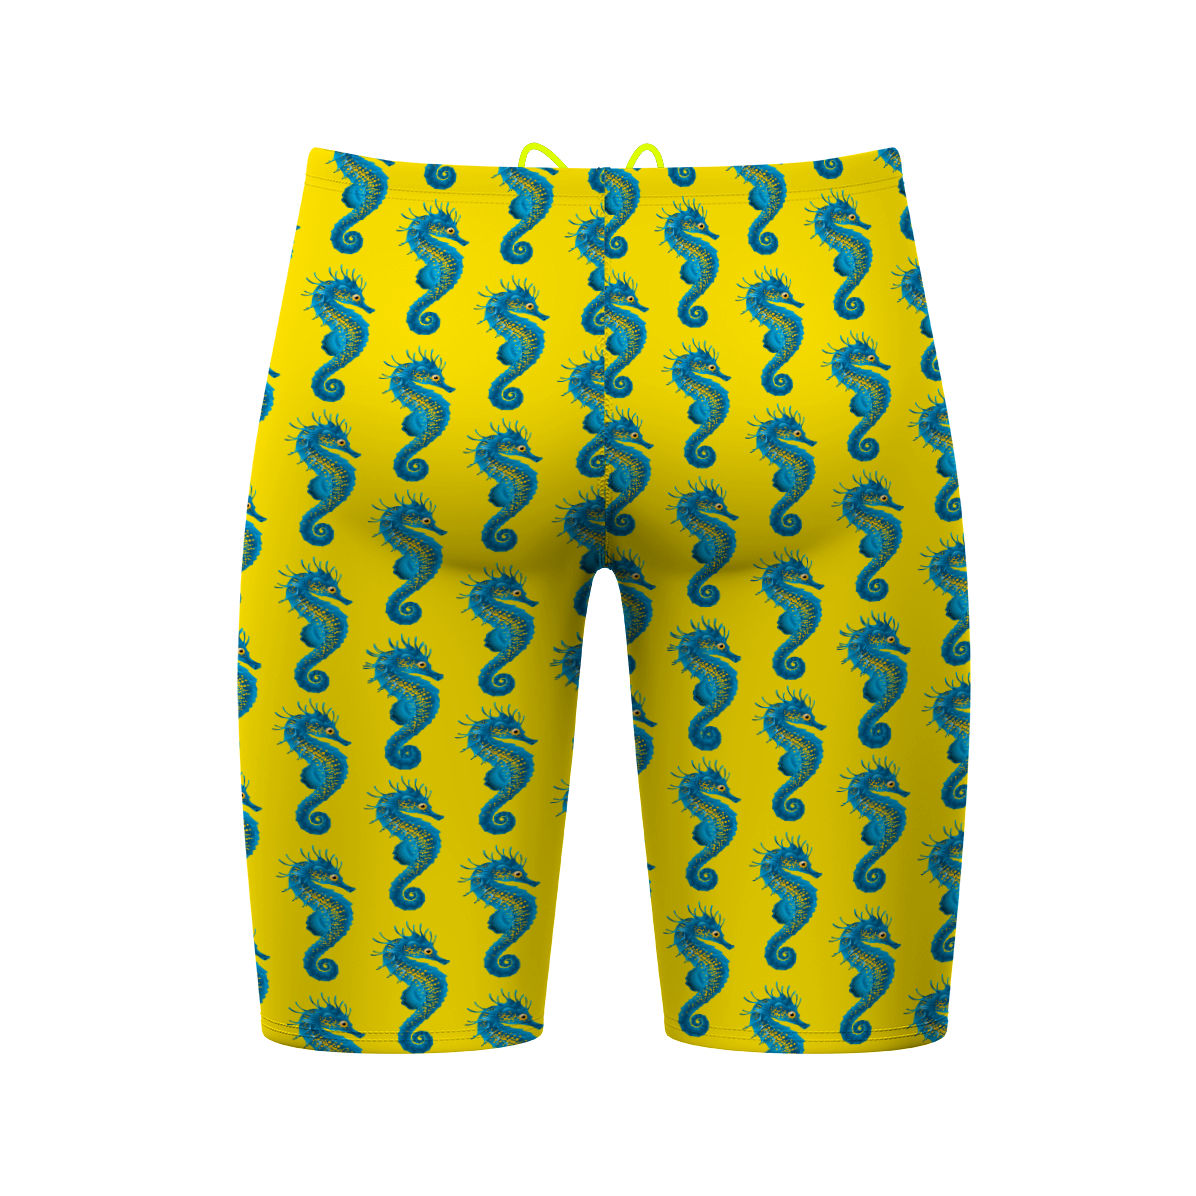 Seahorse - Jammer Swimsuit